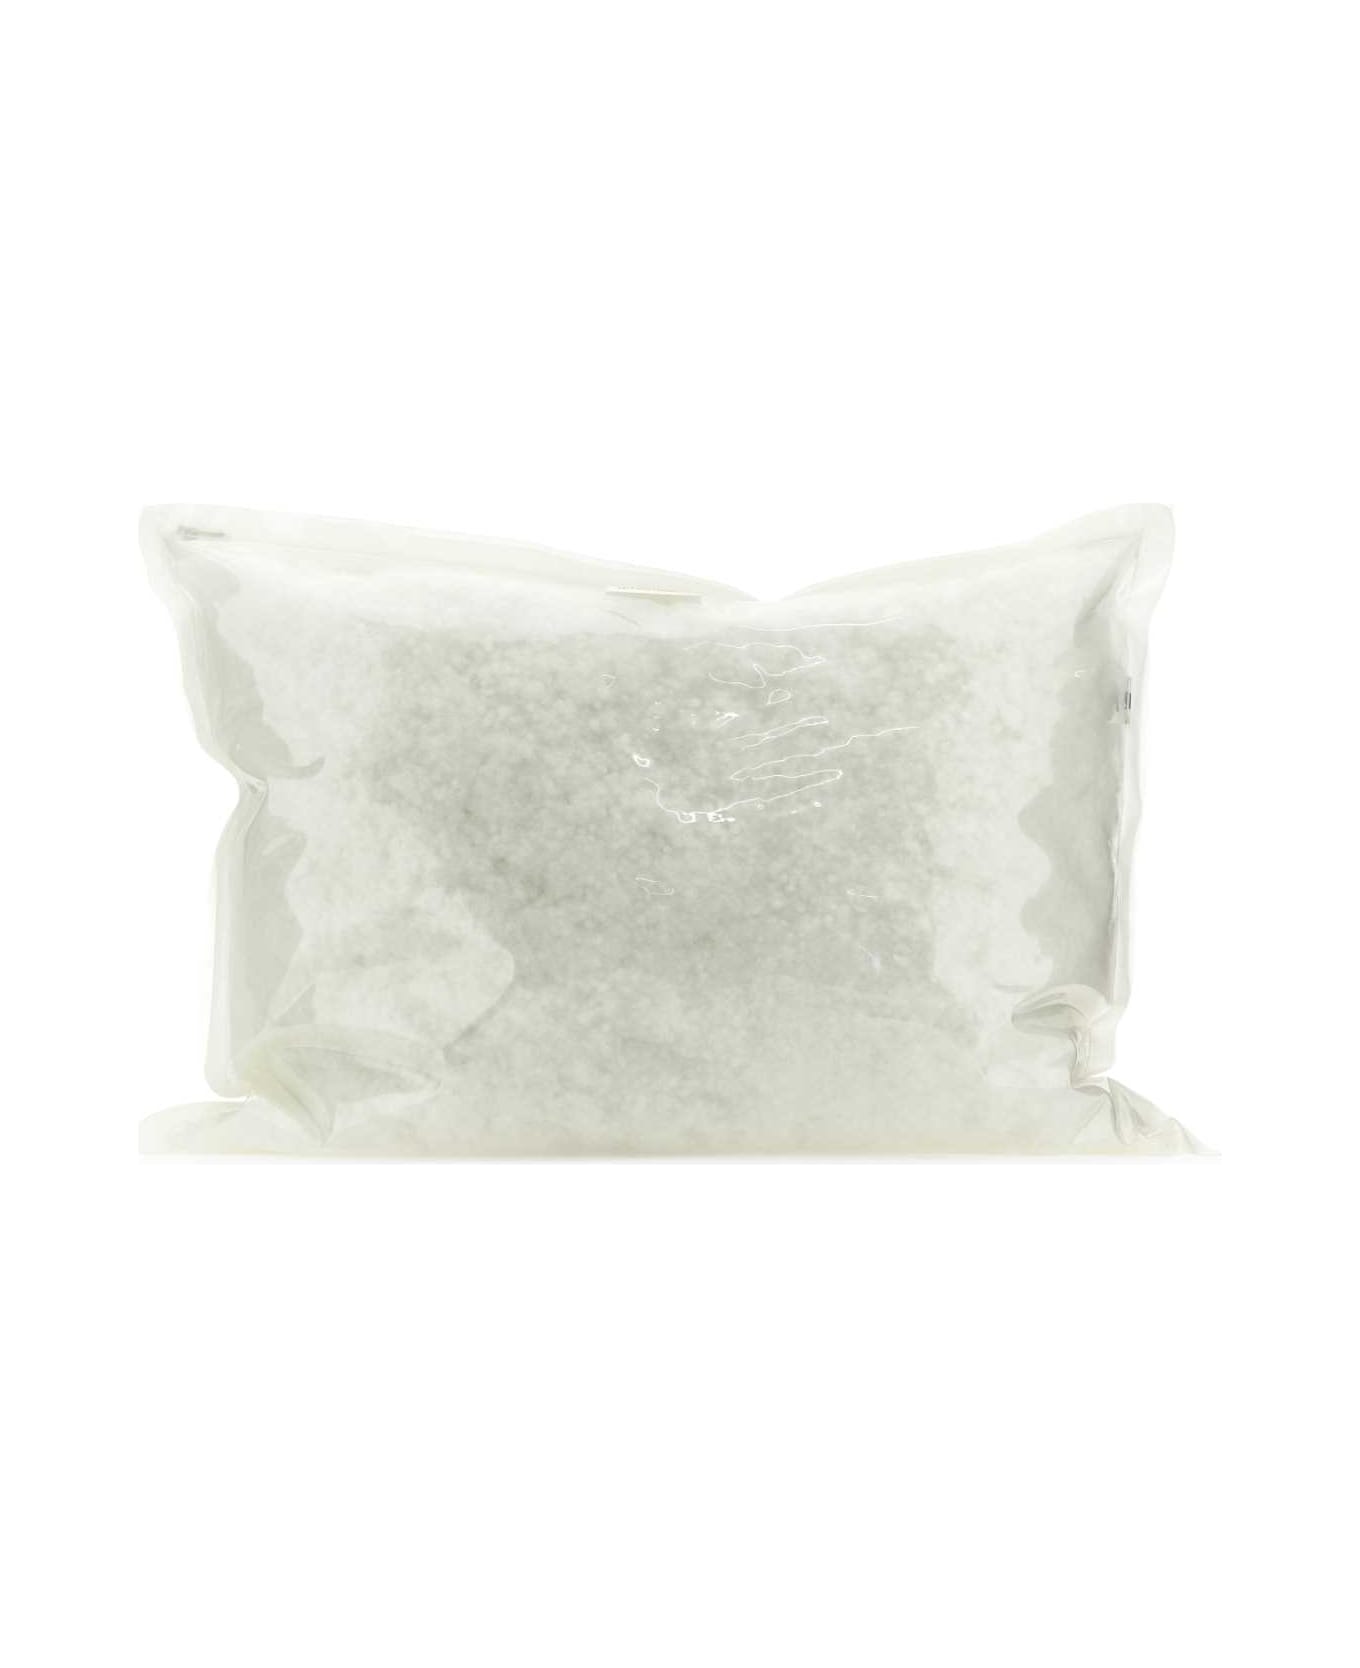 J.W. Anderson White Tpu Large Cushion Clutch - White クラッチバッグ